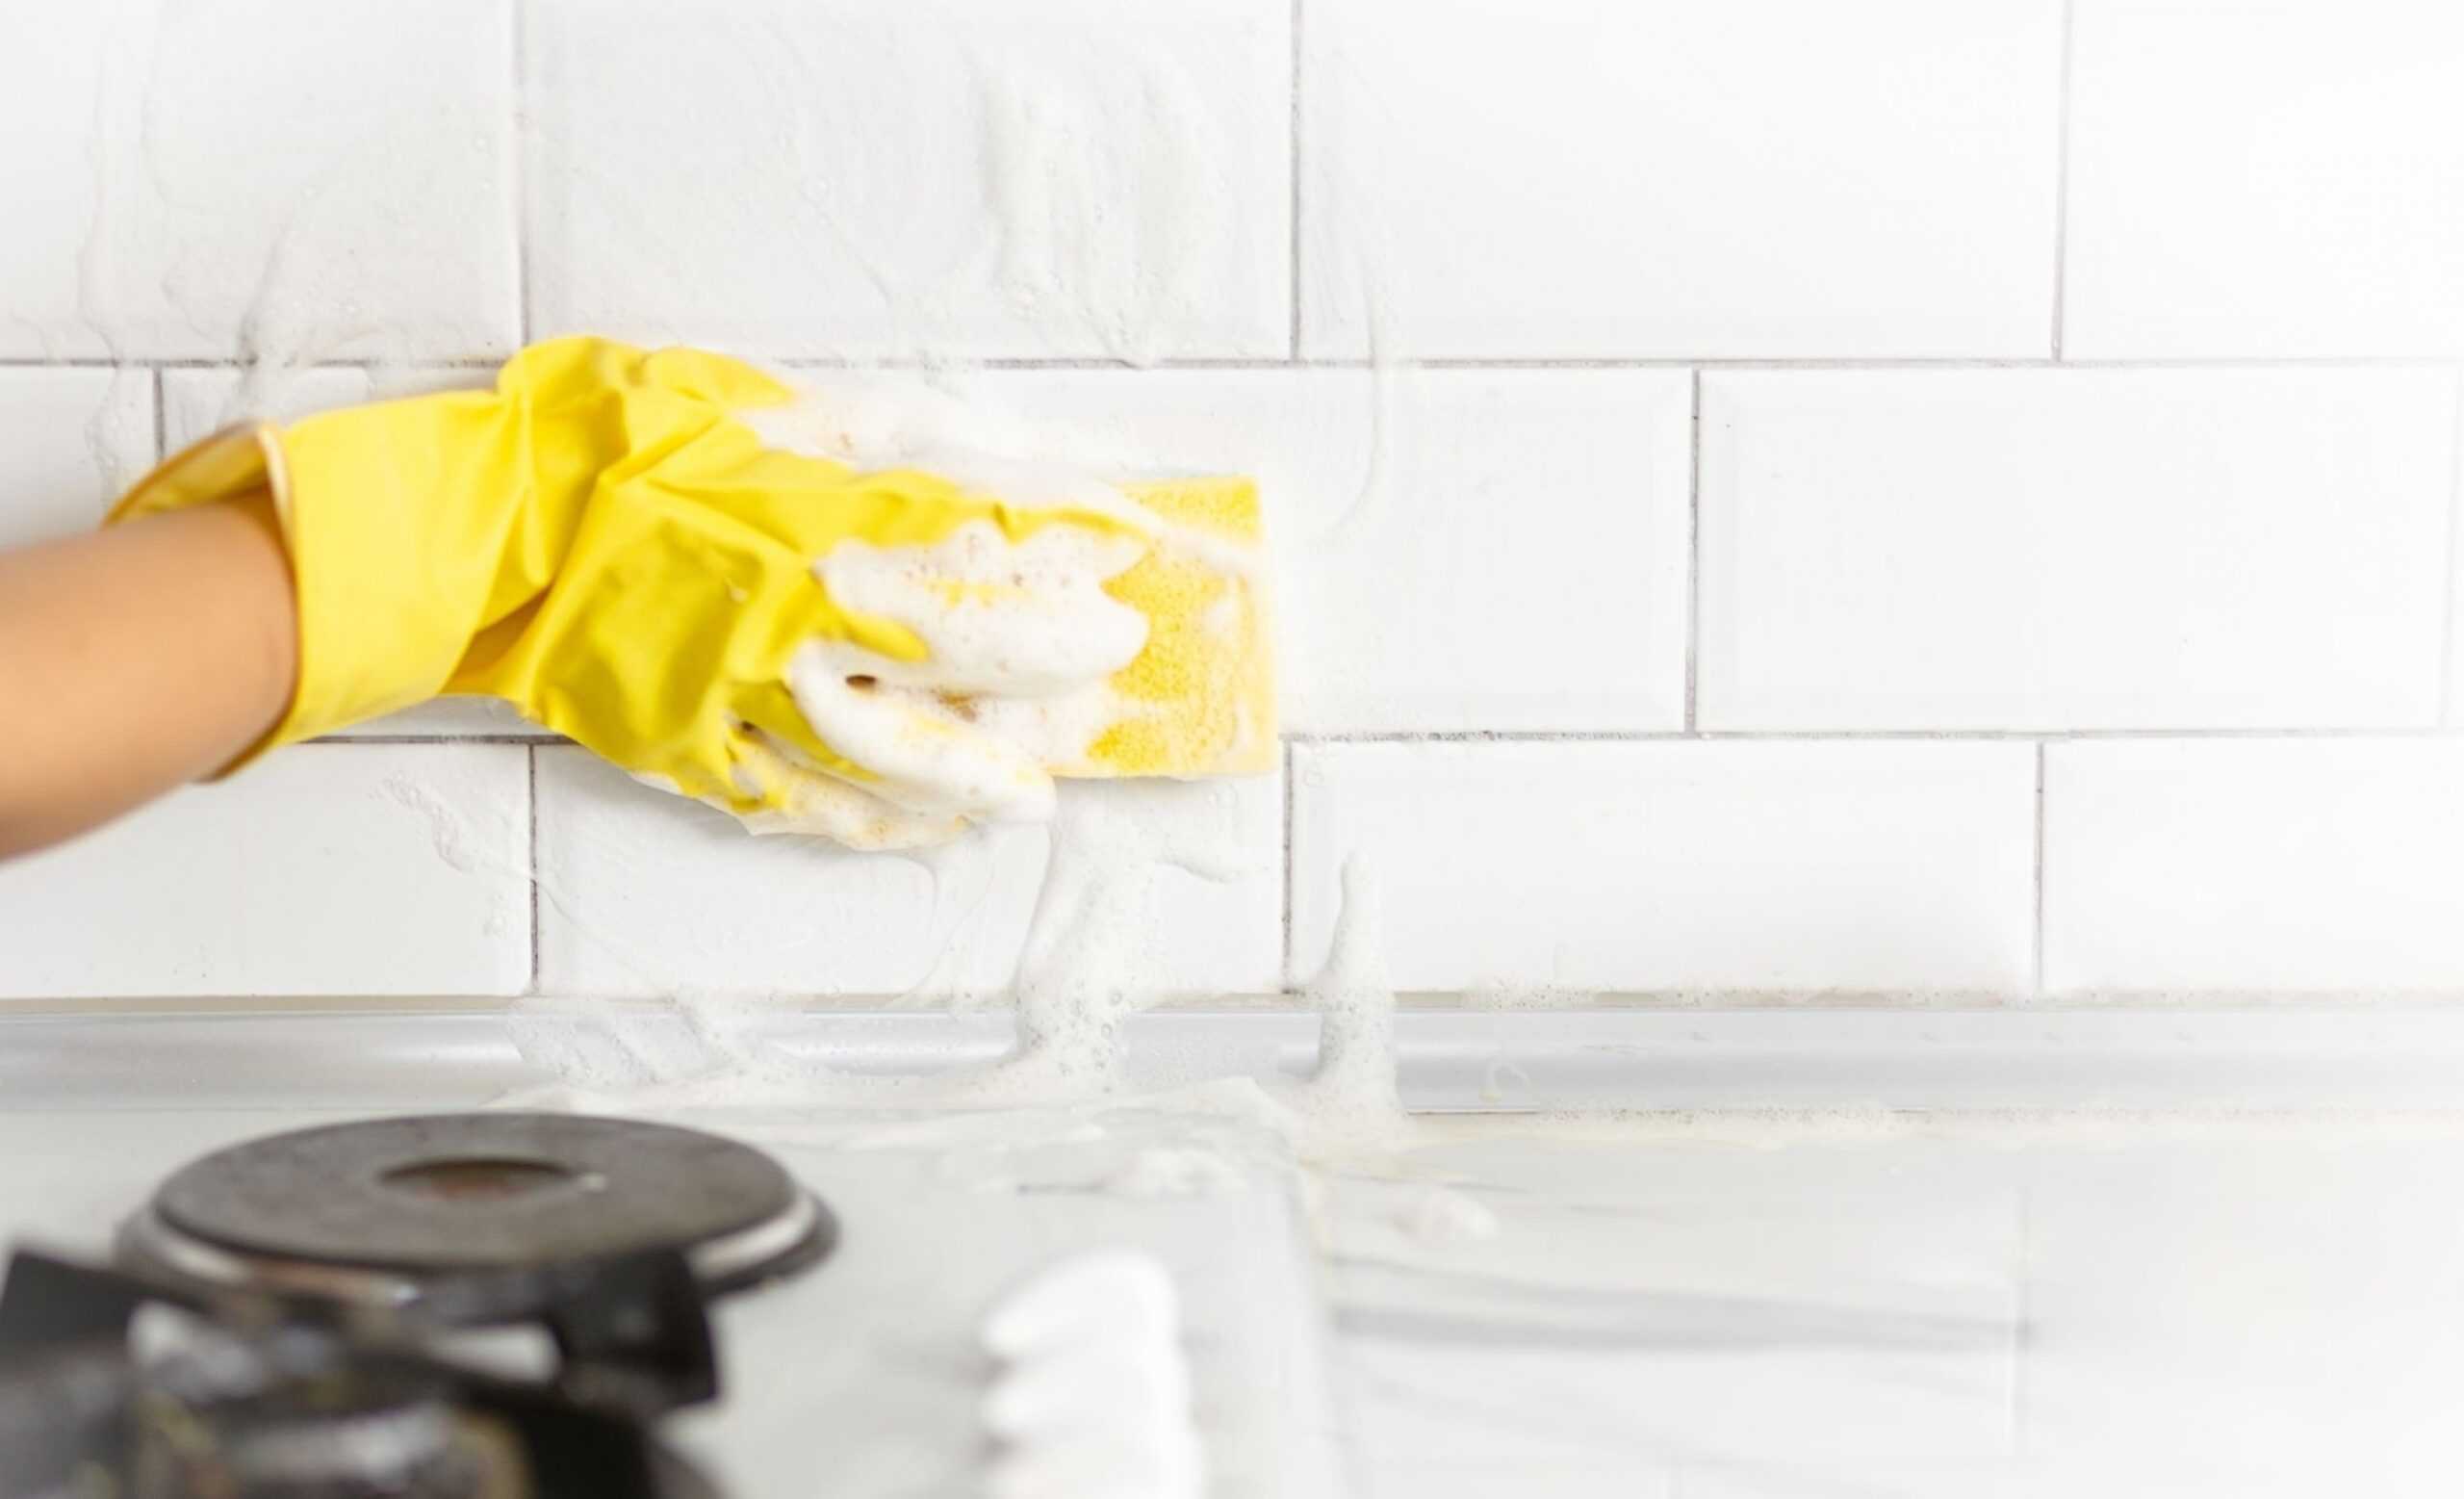 What is Oxybleach and How to Use It Tidyhere Image of Hand and Glove Cleaning the Kitchen Tiles